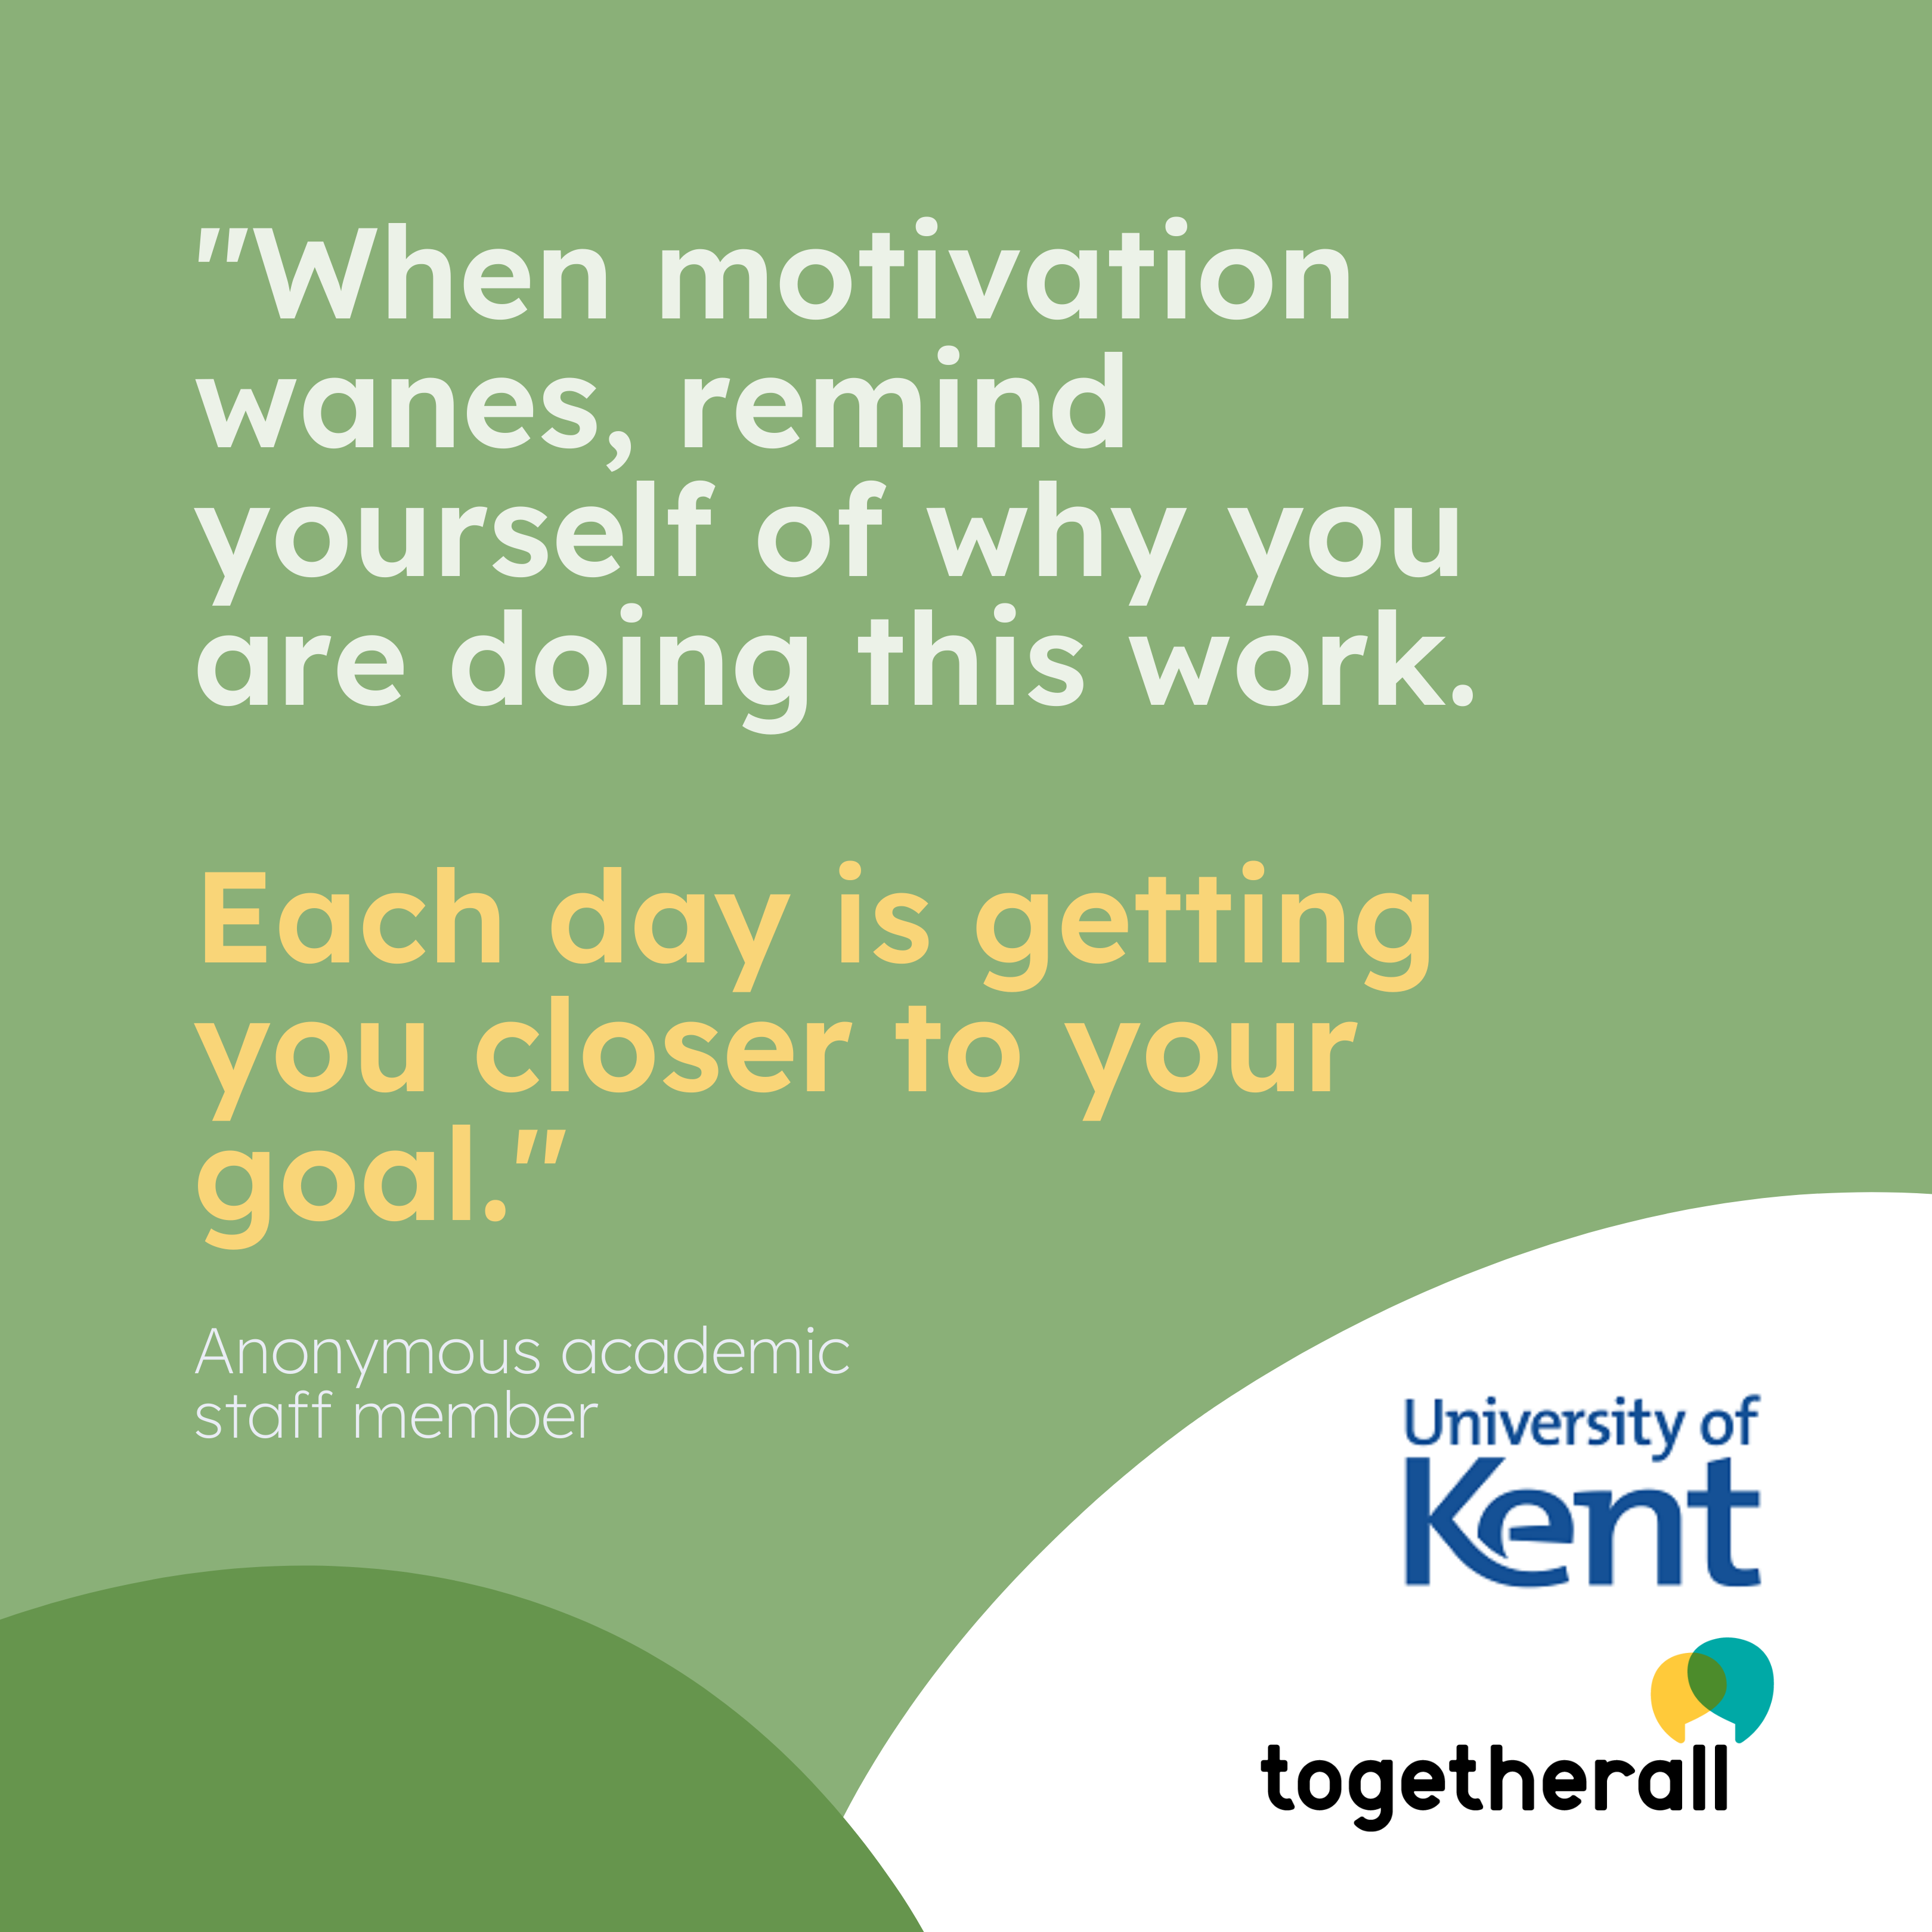 "When motivation wanes, remind yourself of why you are doing this work. Each day is getting you closer to the goal"